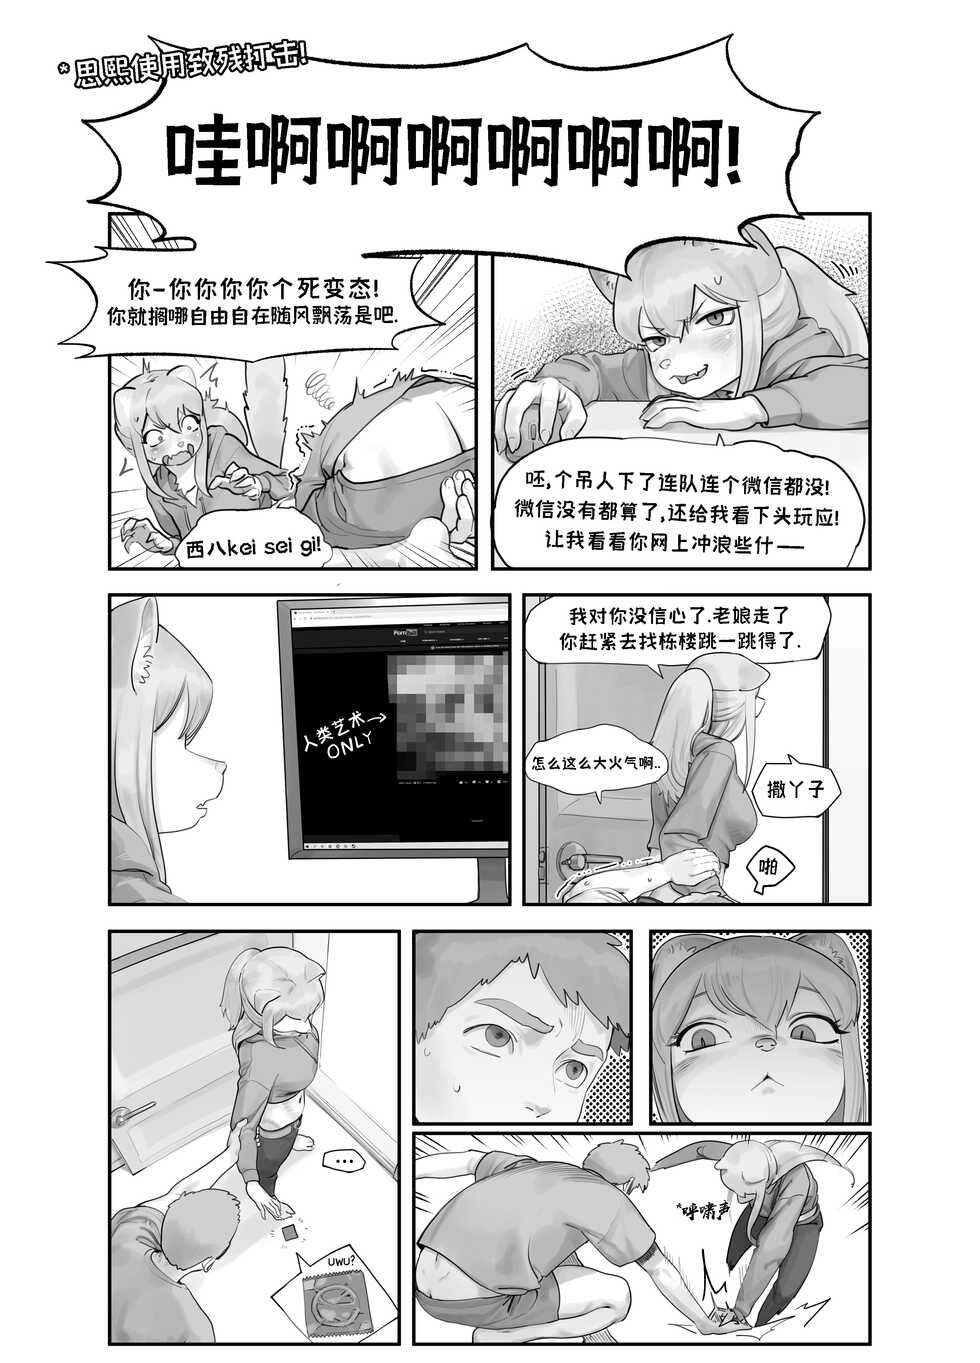 [Gudl] A Suspiciously Erotic Childhood Friend (Pixiv)《可疑瑟瑟青梅竹马》 [Chinese] - Page 2